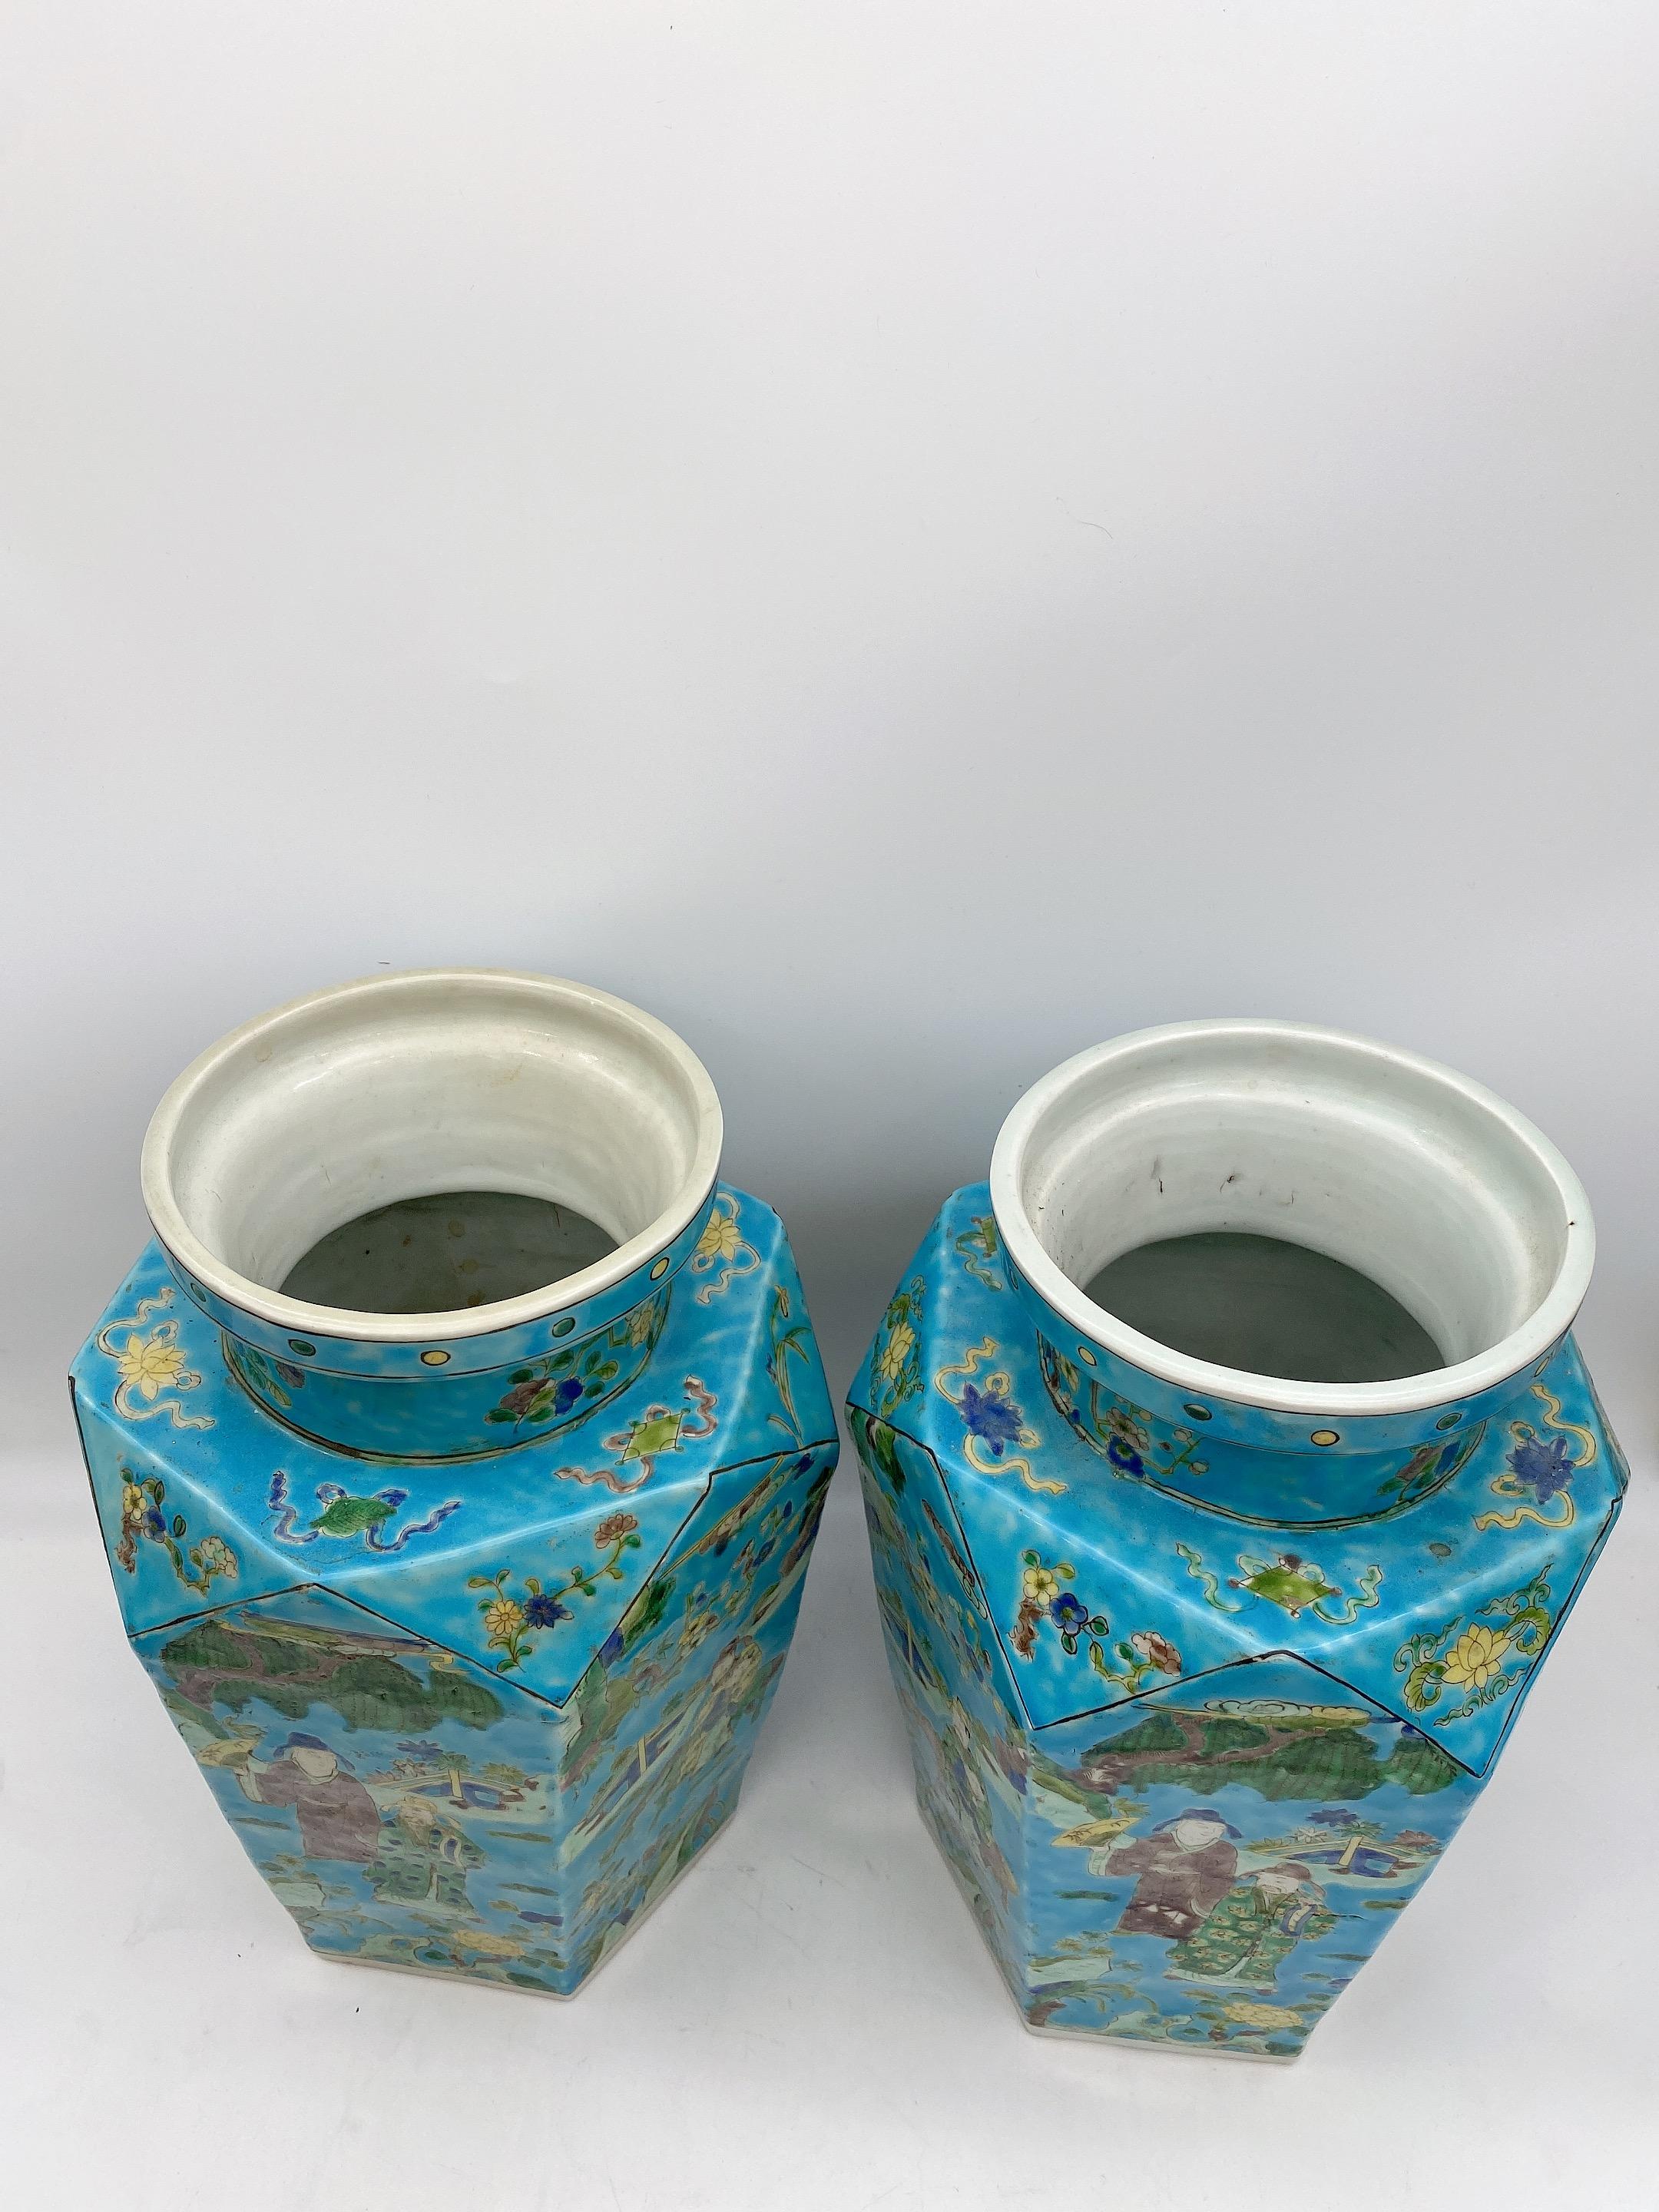 Qing Antique Pair of Chinese Porcelain Vases For Sale